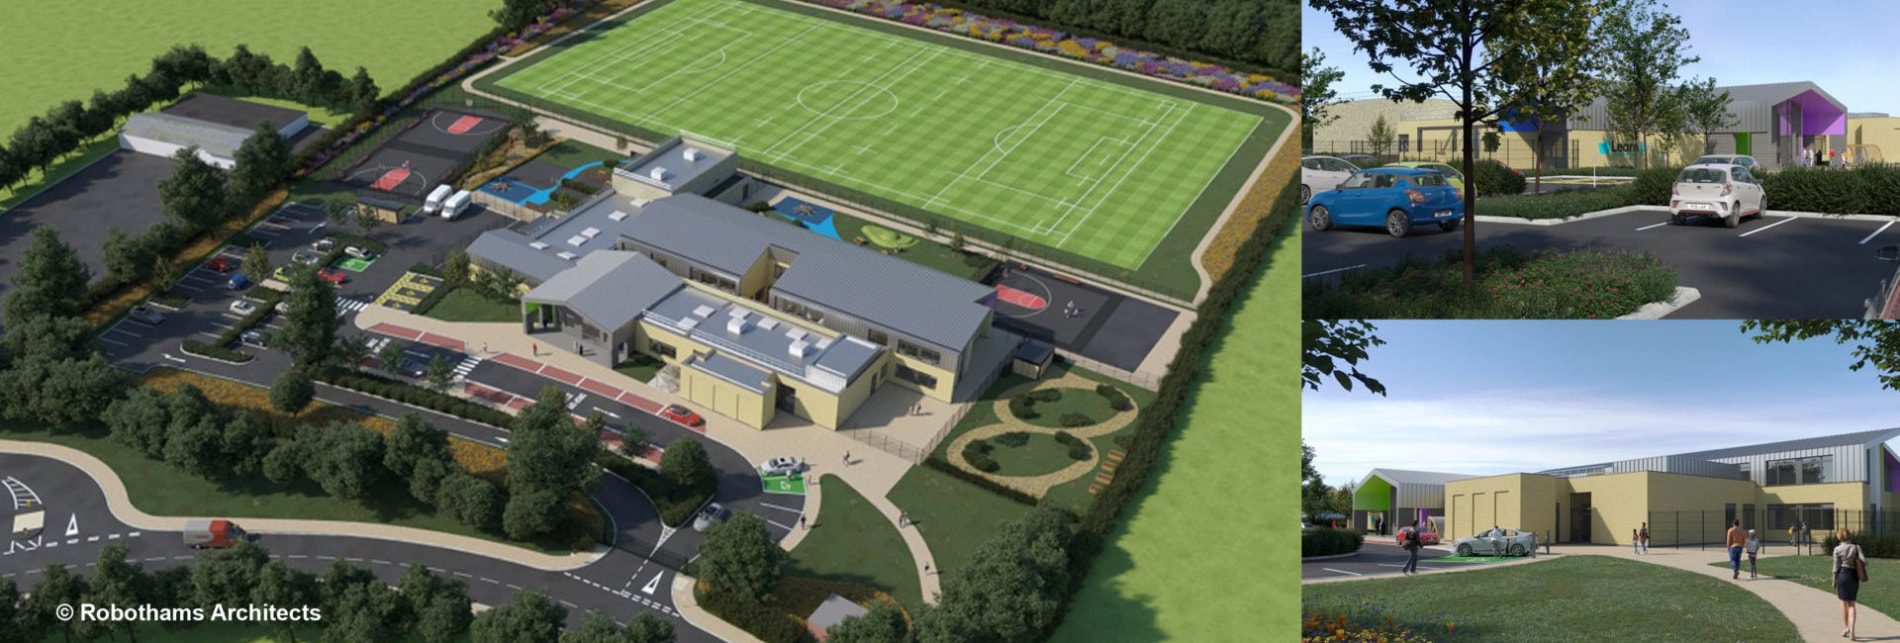 Planning Approval for a new Social, Emotional and Mental Health School (SEMH) in Brockworth, Gloucestershire. thumbnail image